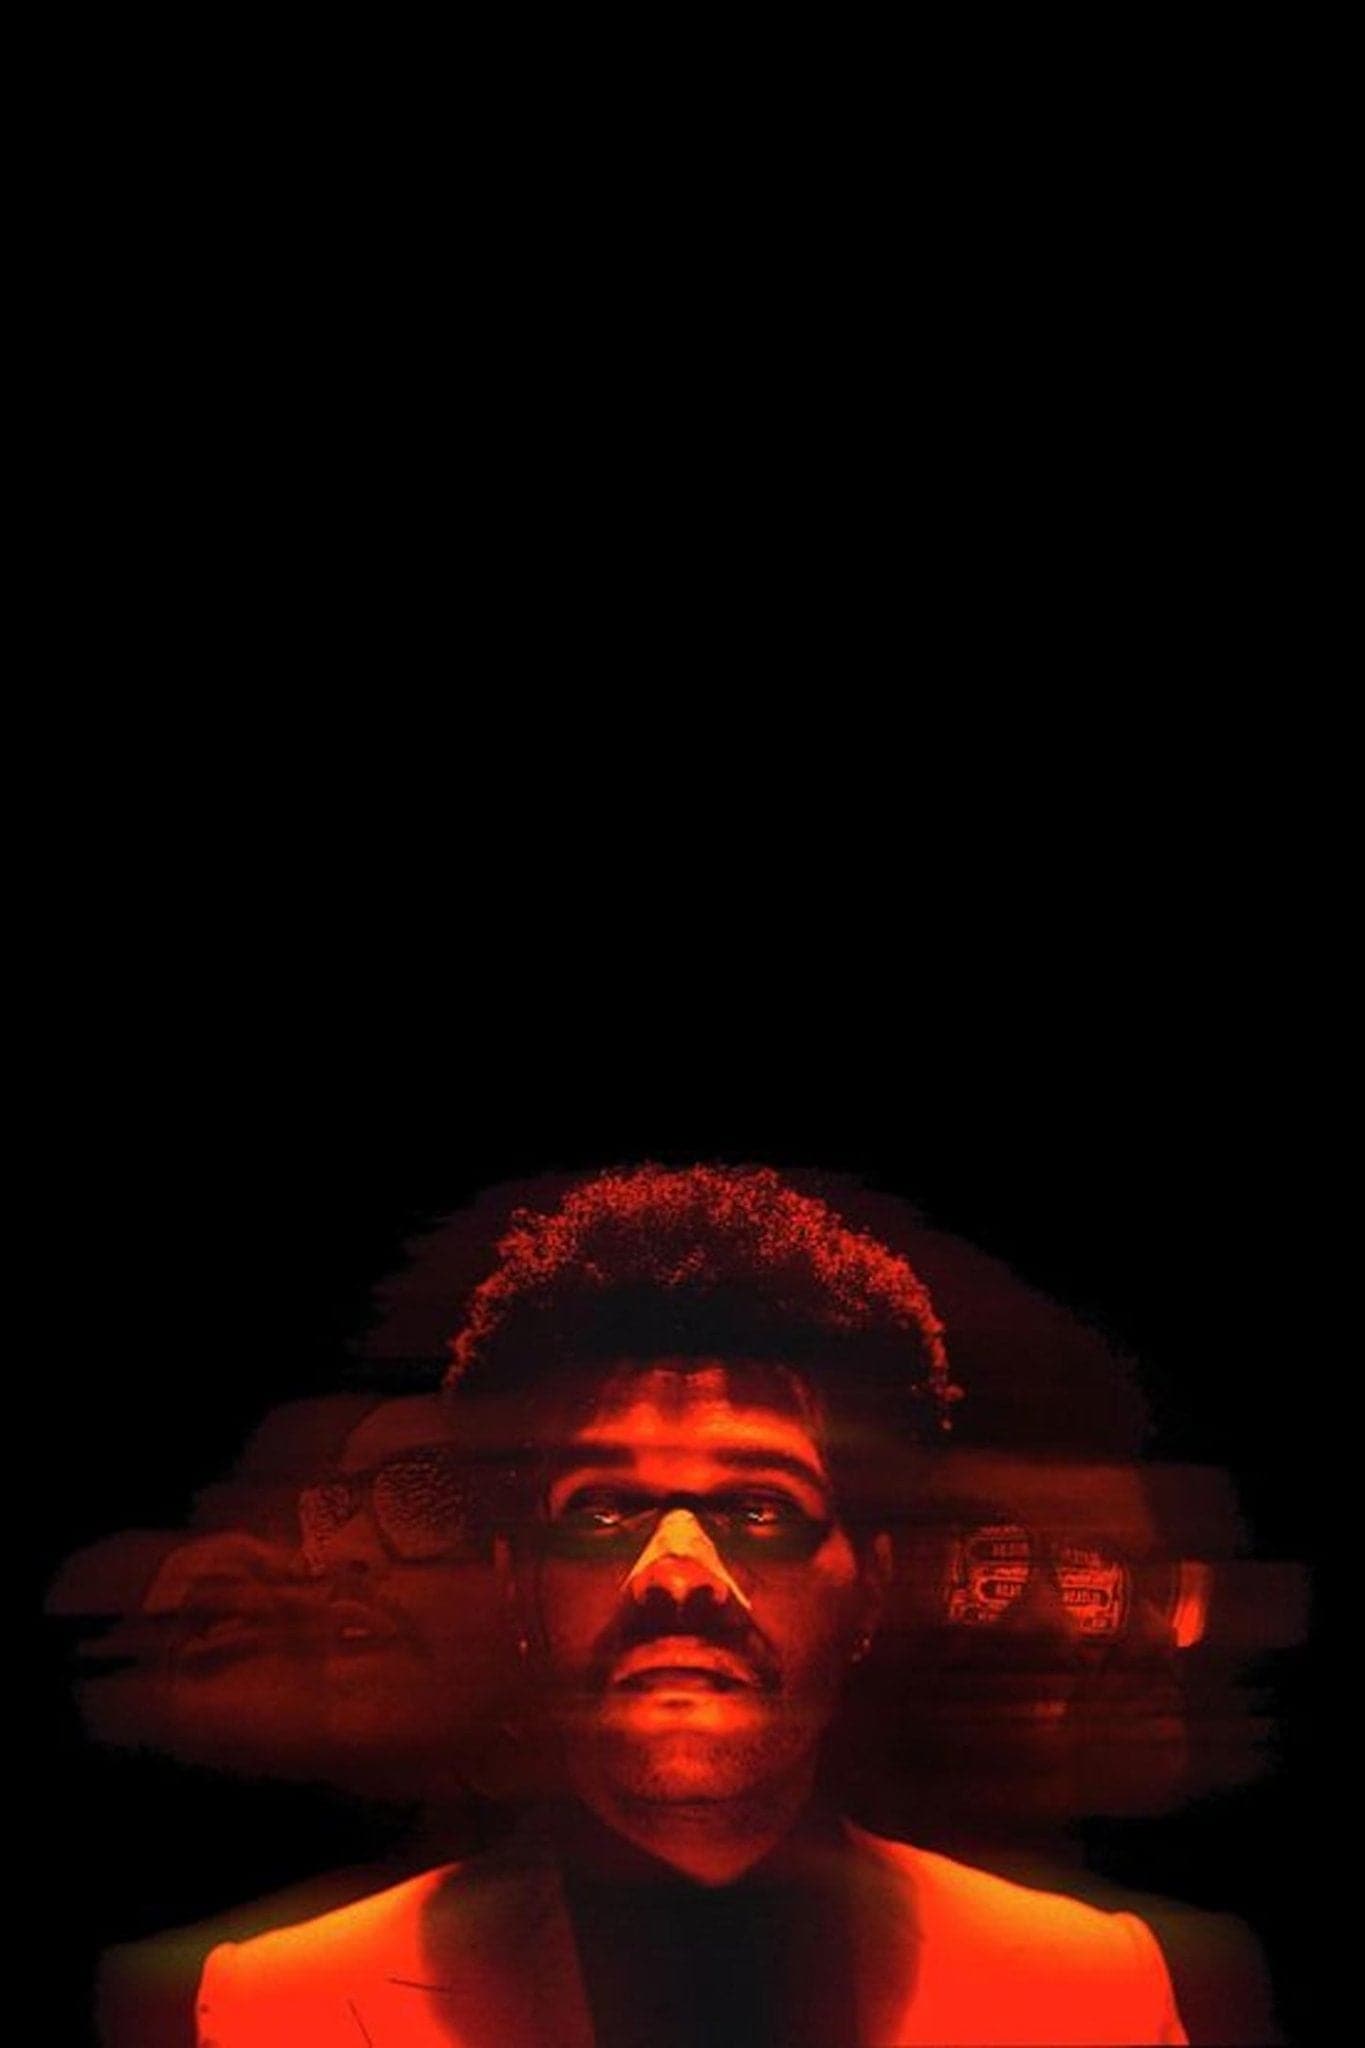 The Weeknd 'Blurred' Poster - Posters Plug